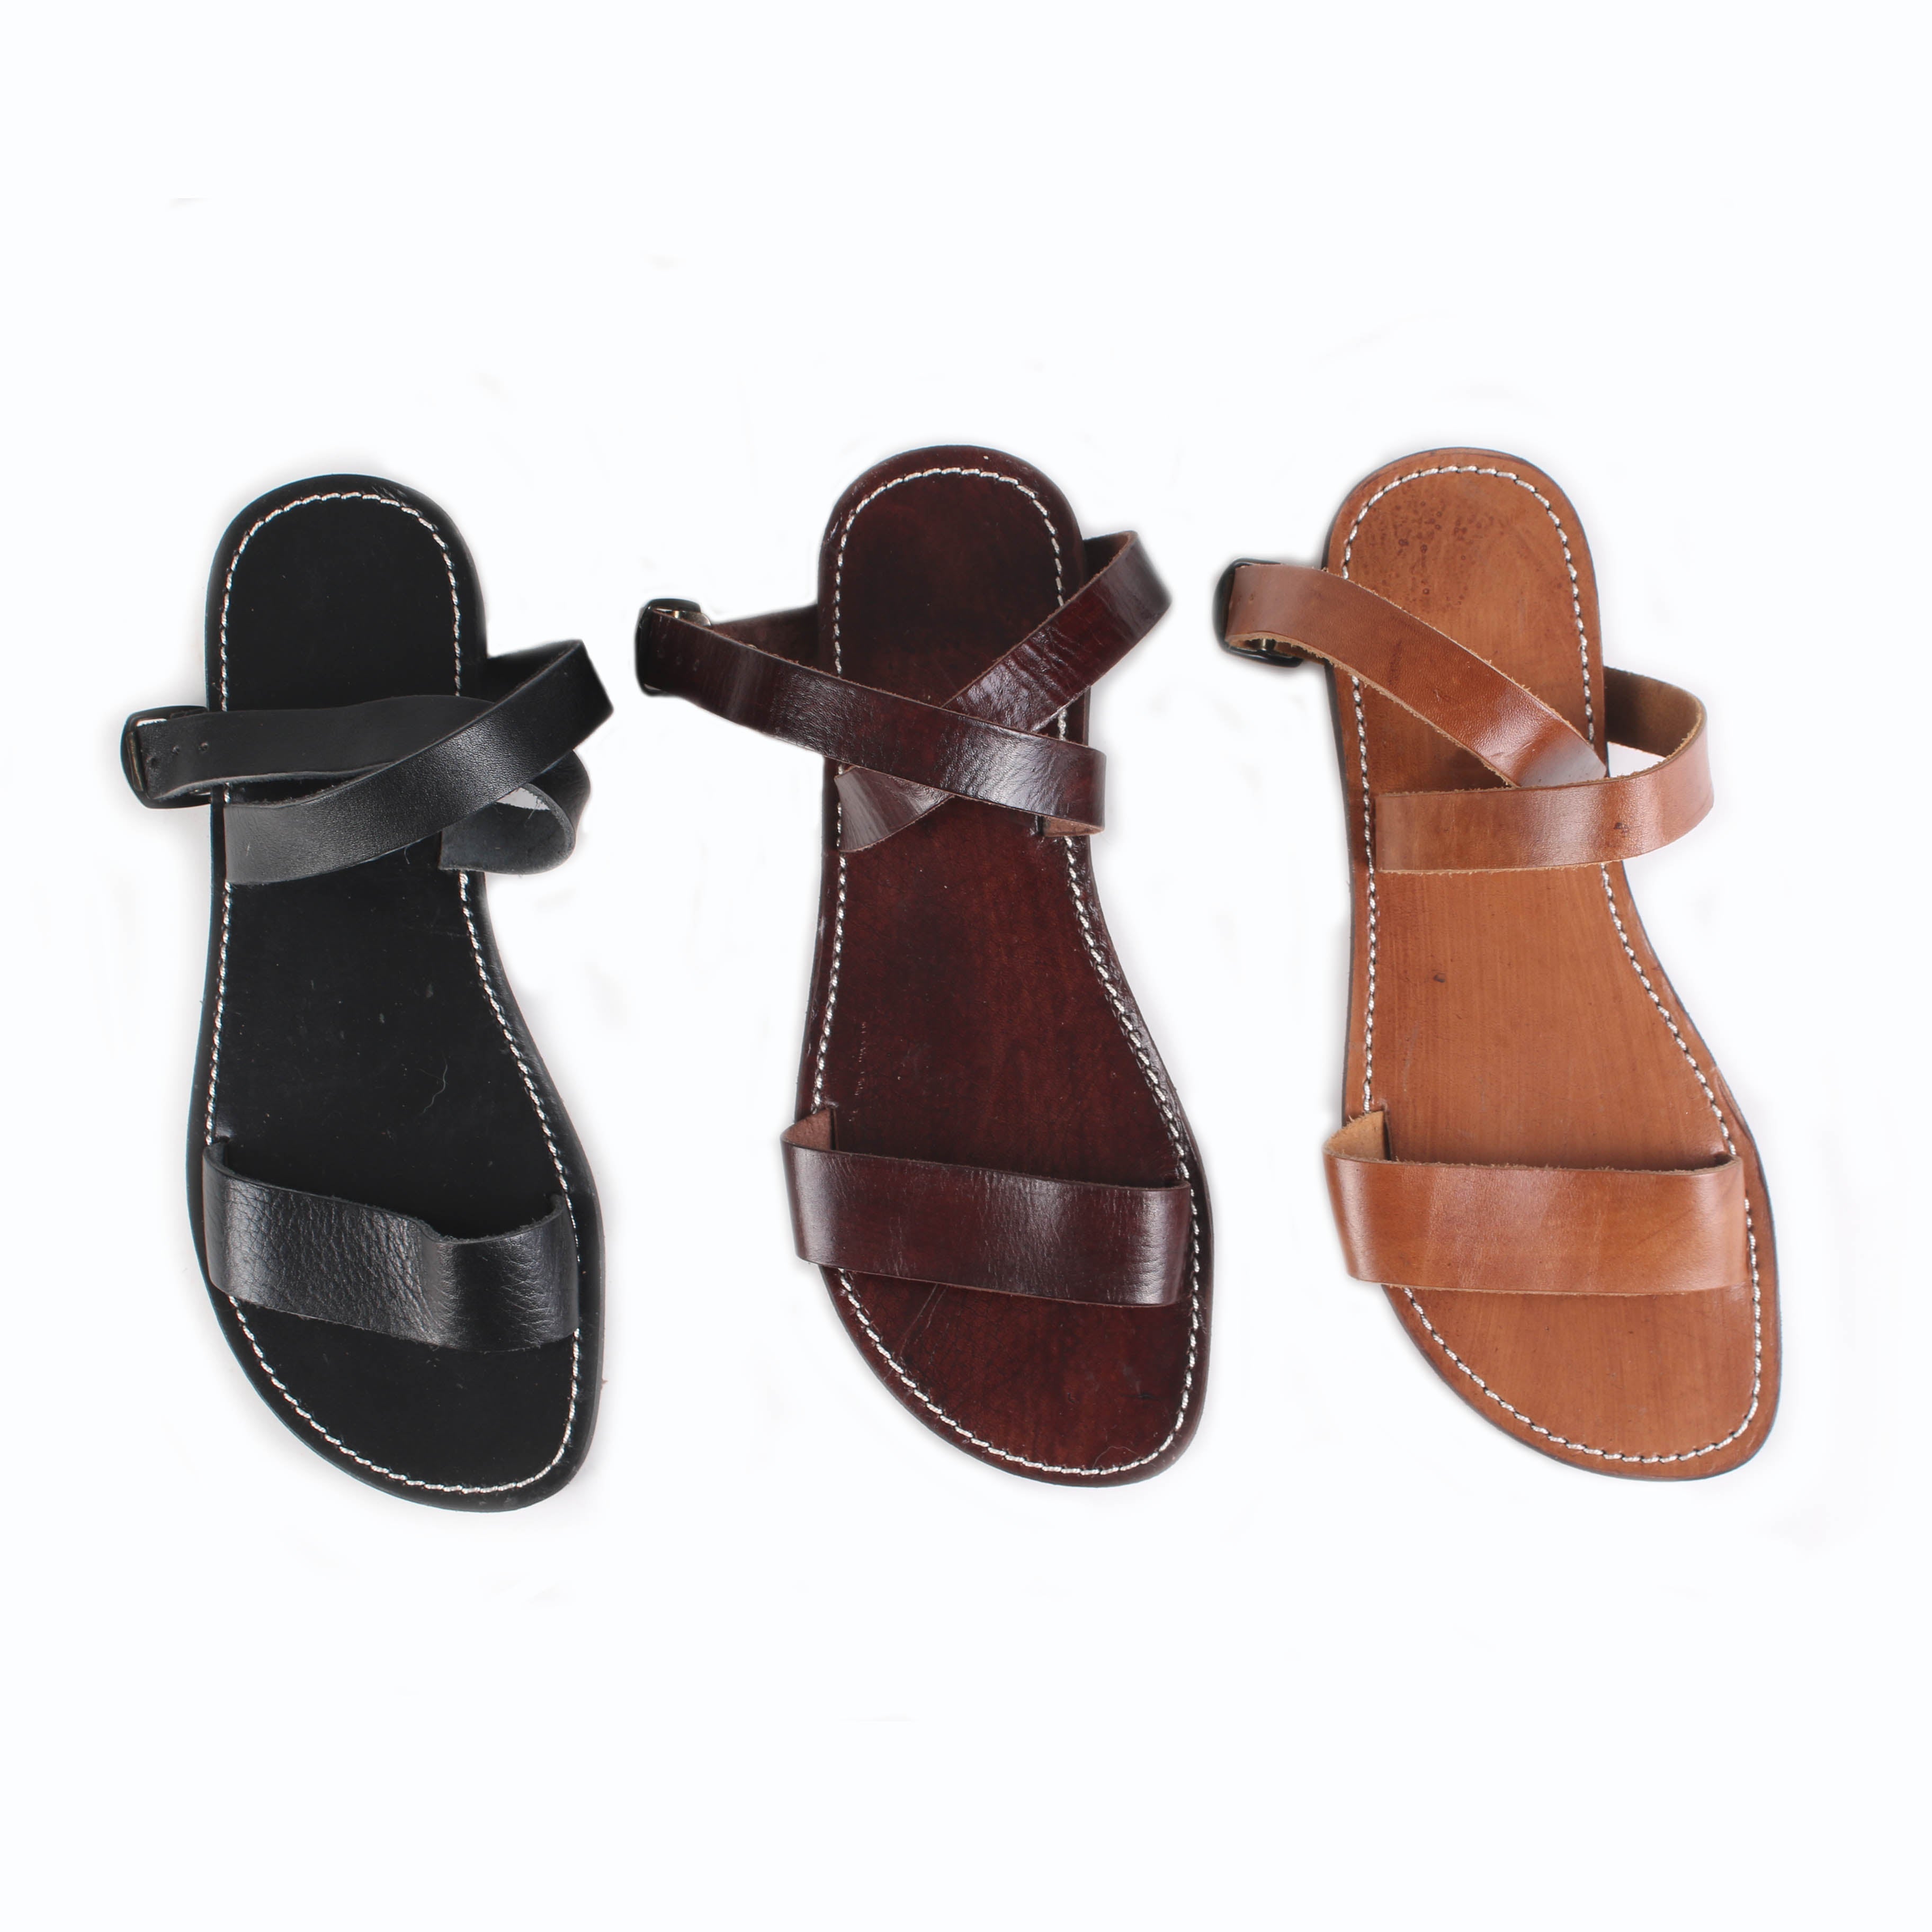 Wrap Leather Sandals - handmade leather bags smadlondon